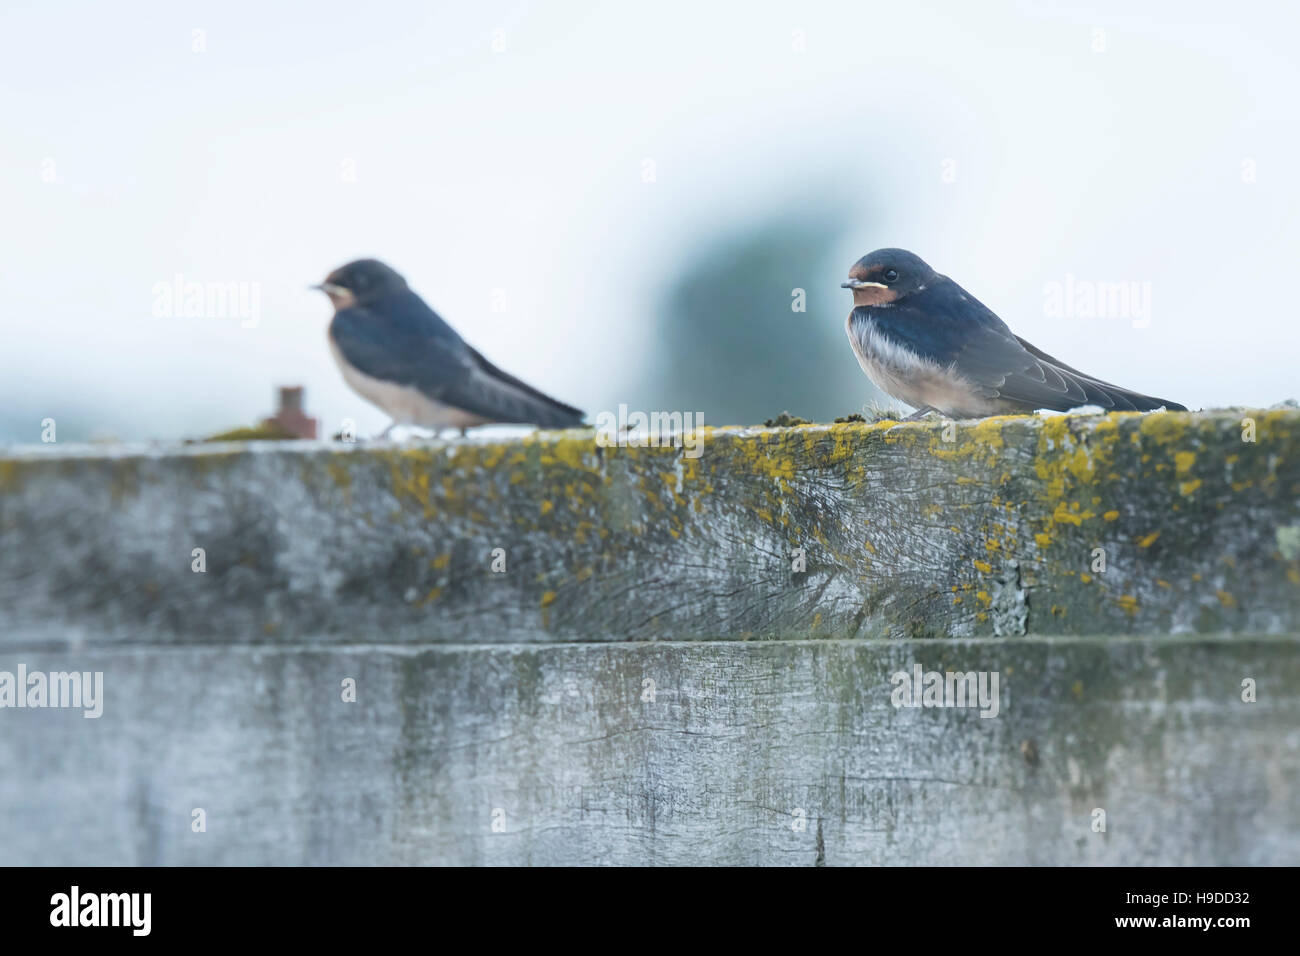 Barn Swallows (Hirundo rustica) foraging and hunts insects, feed, feeeding and taking their occasional rest on their turns. Stock Photo